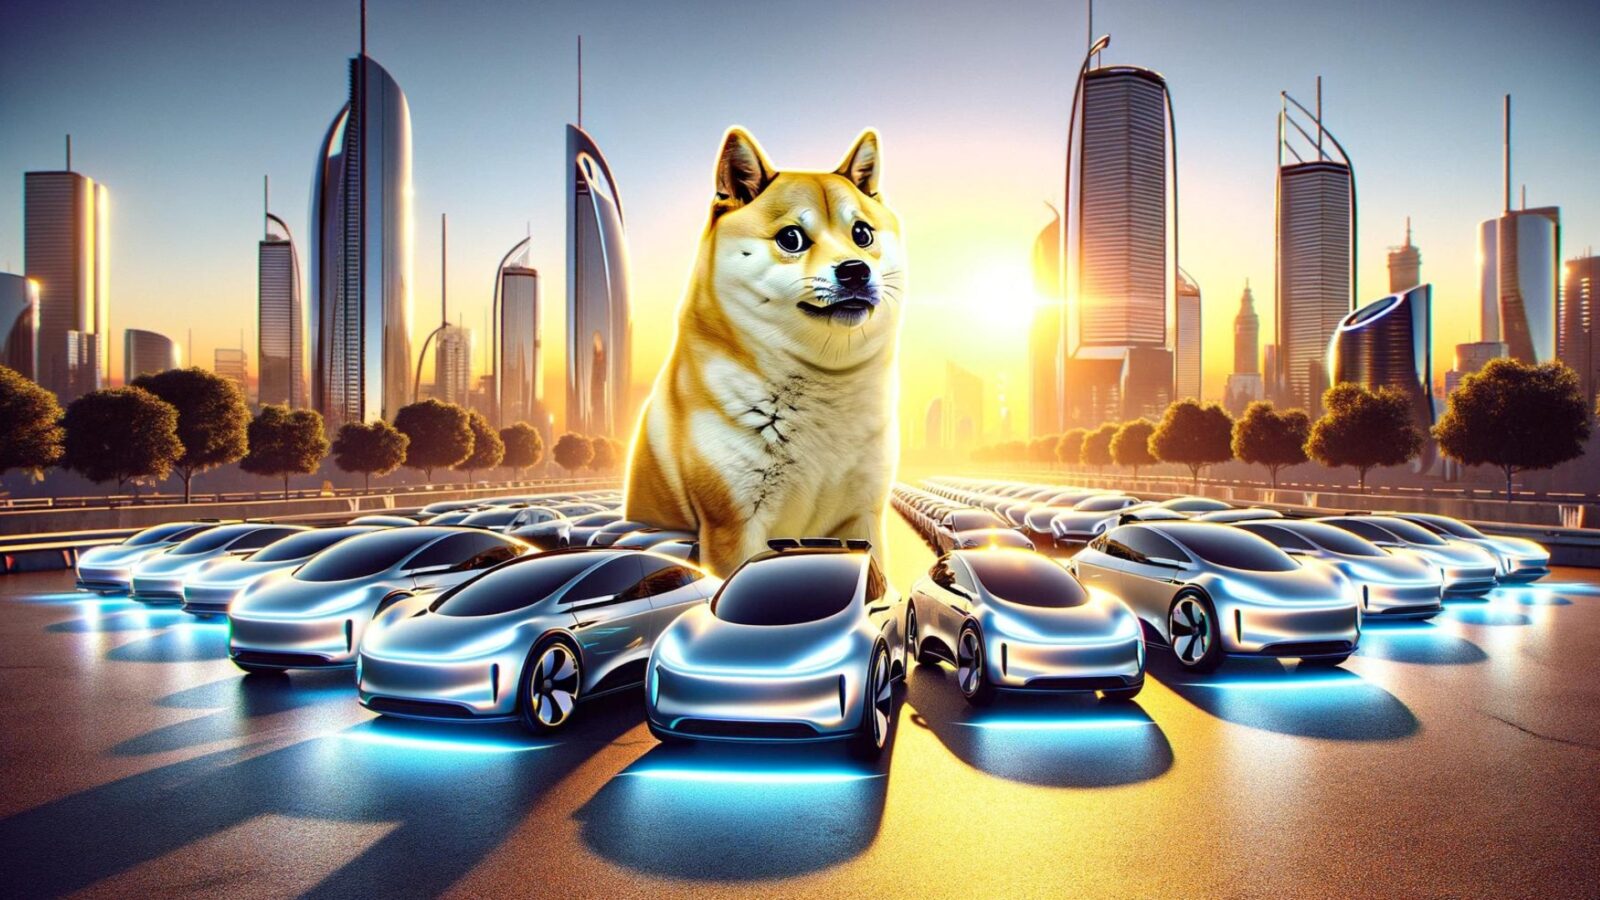 Elon Musk Considers Dogecoin for Tesla Purchases